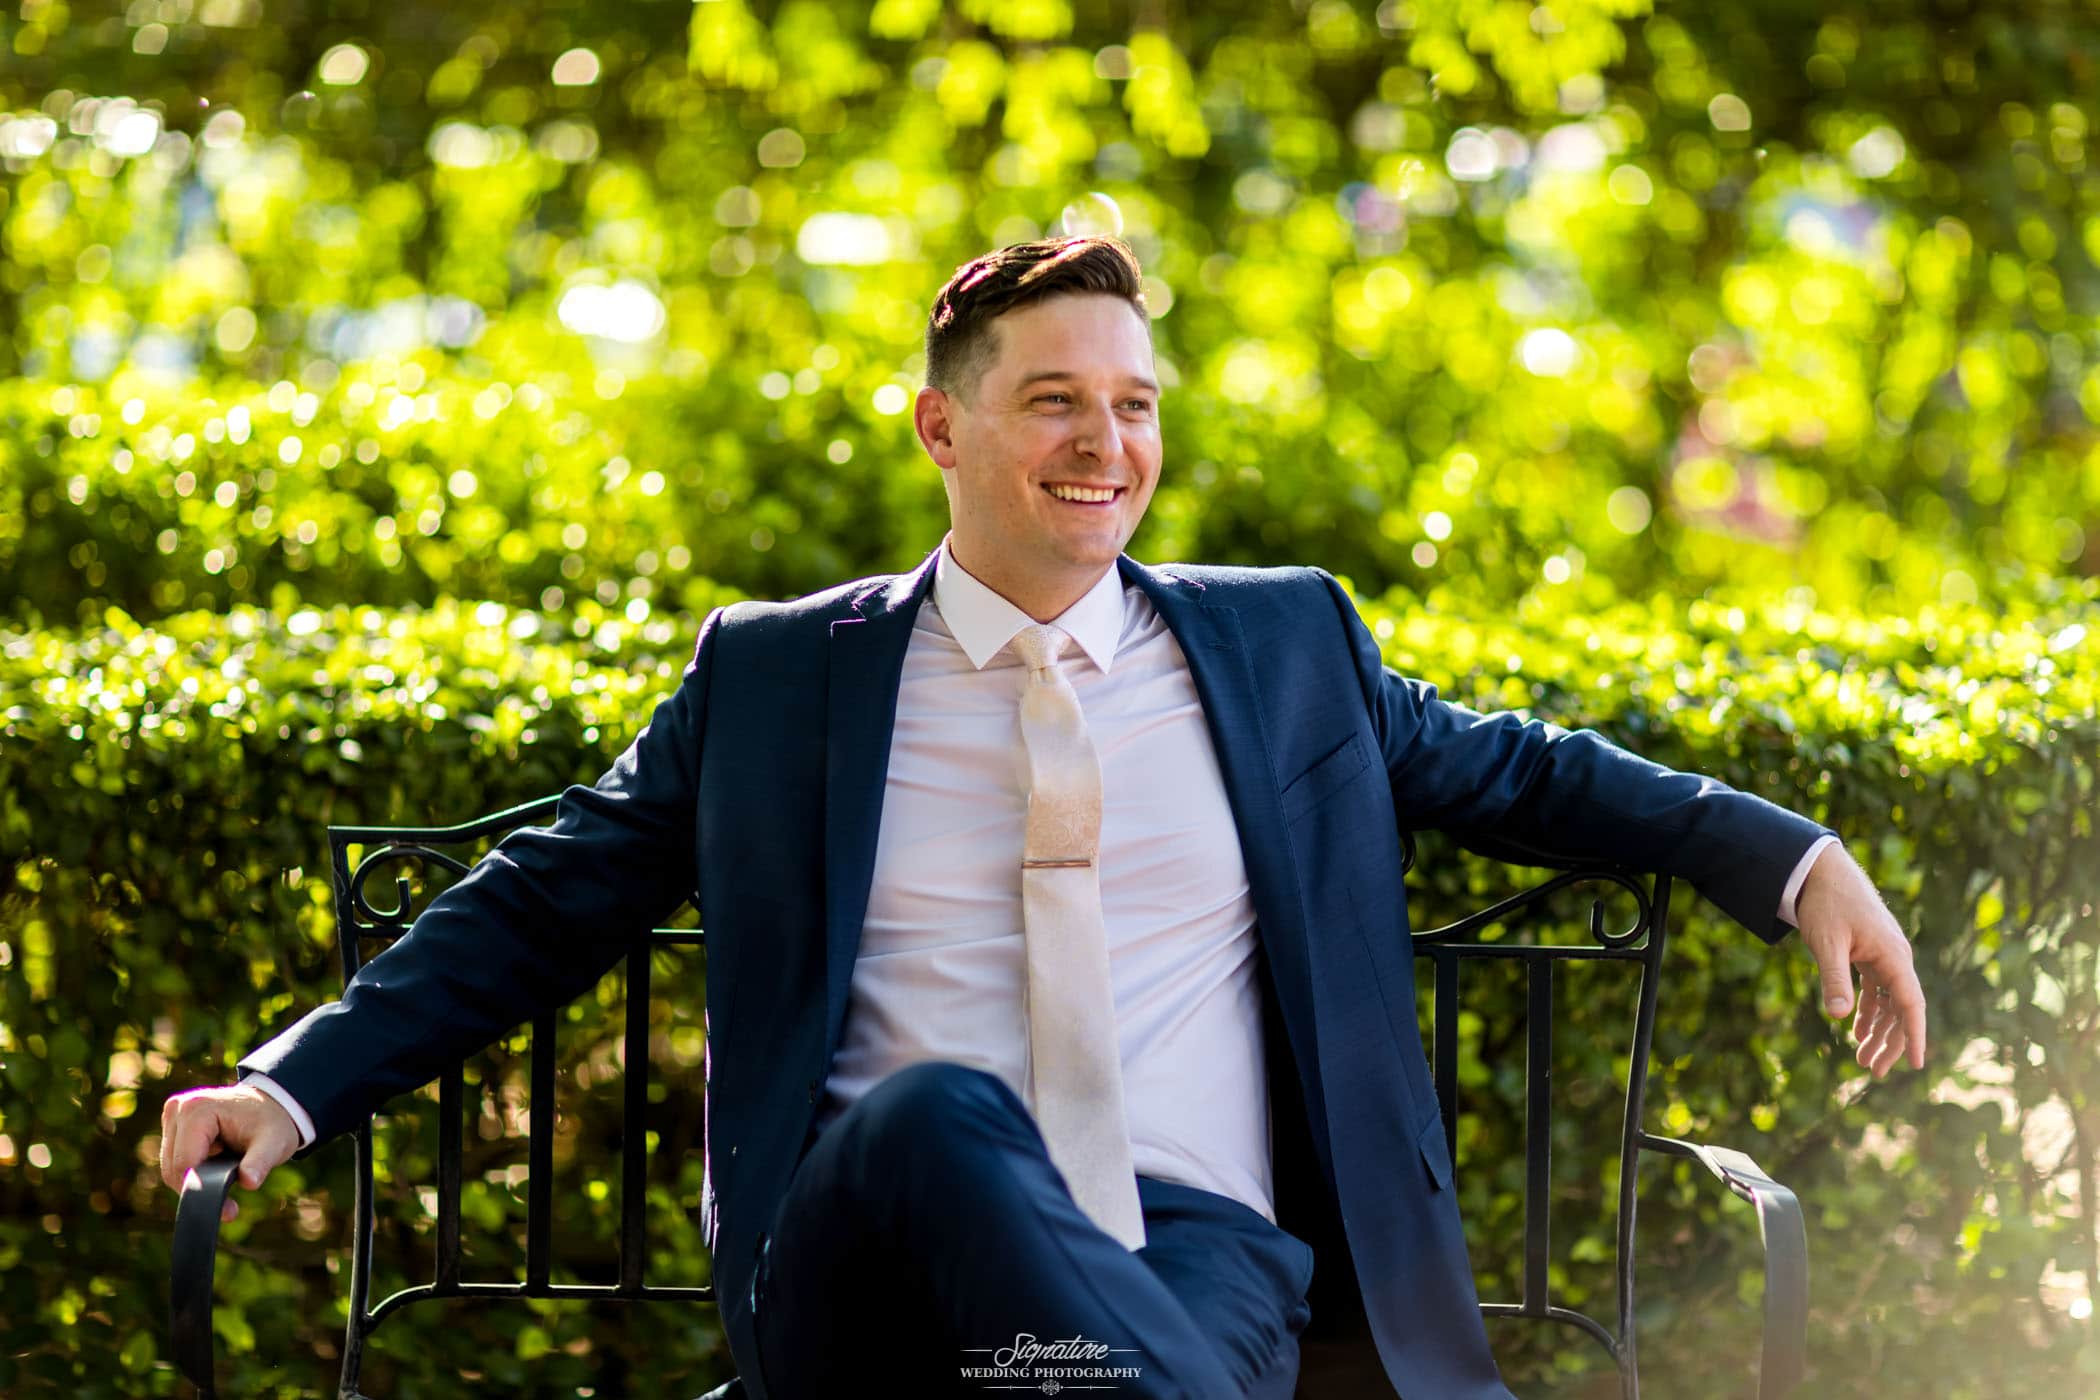 Groom sitting on bench smiling